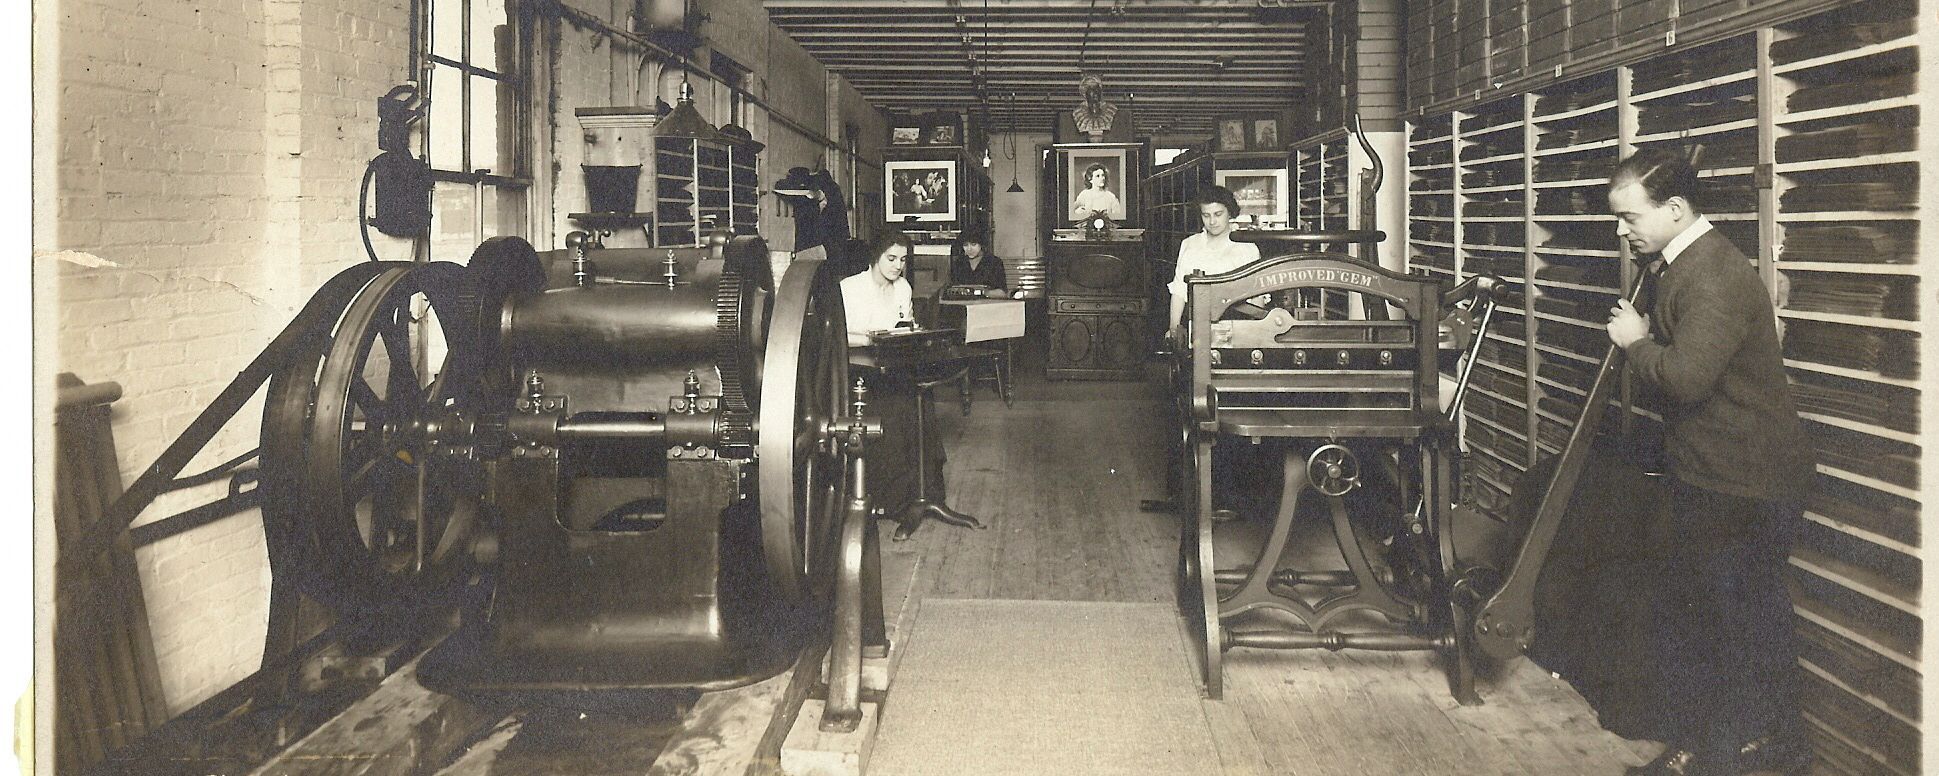 Print shop shown with big machines and people working with transcribers